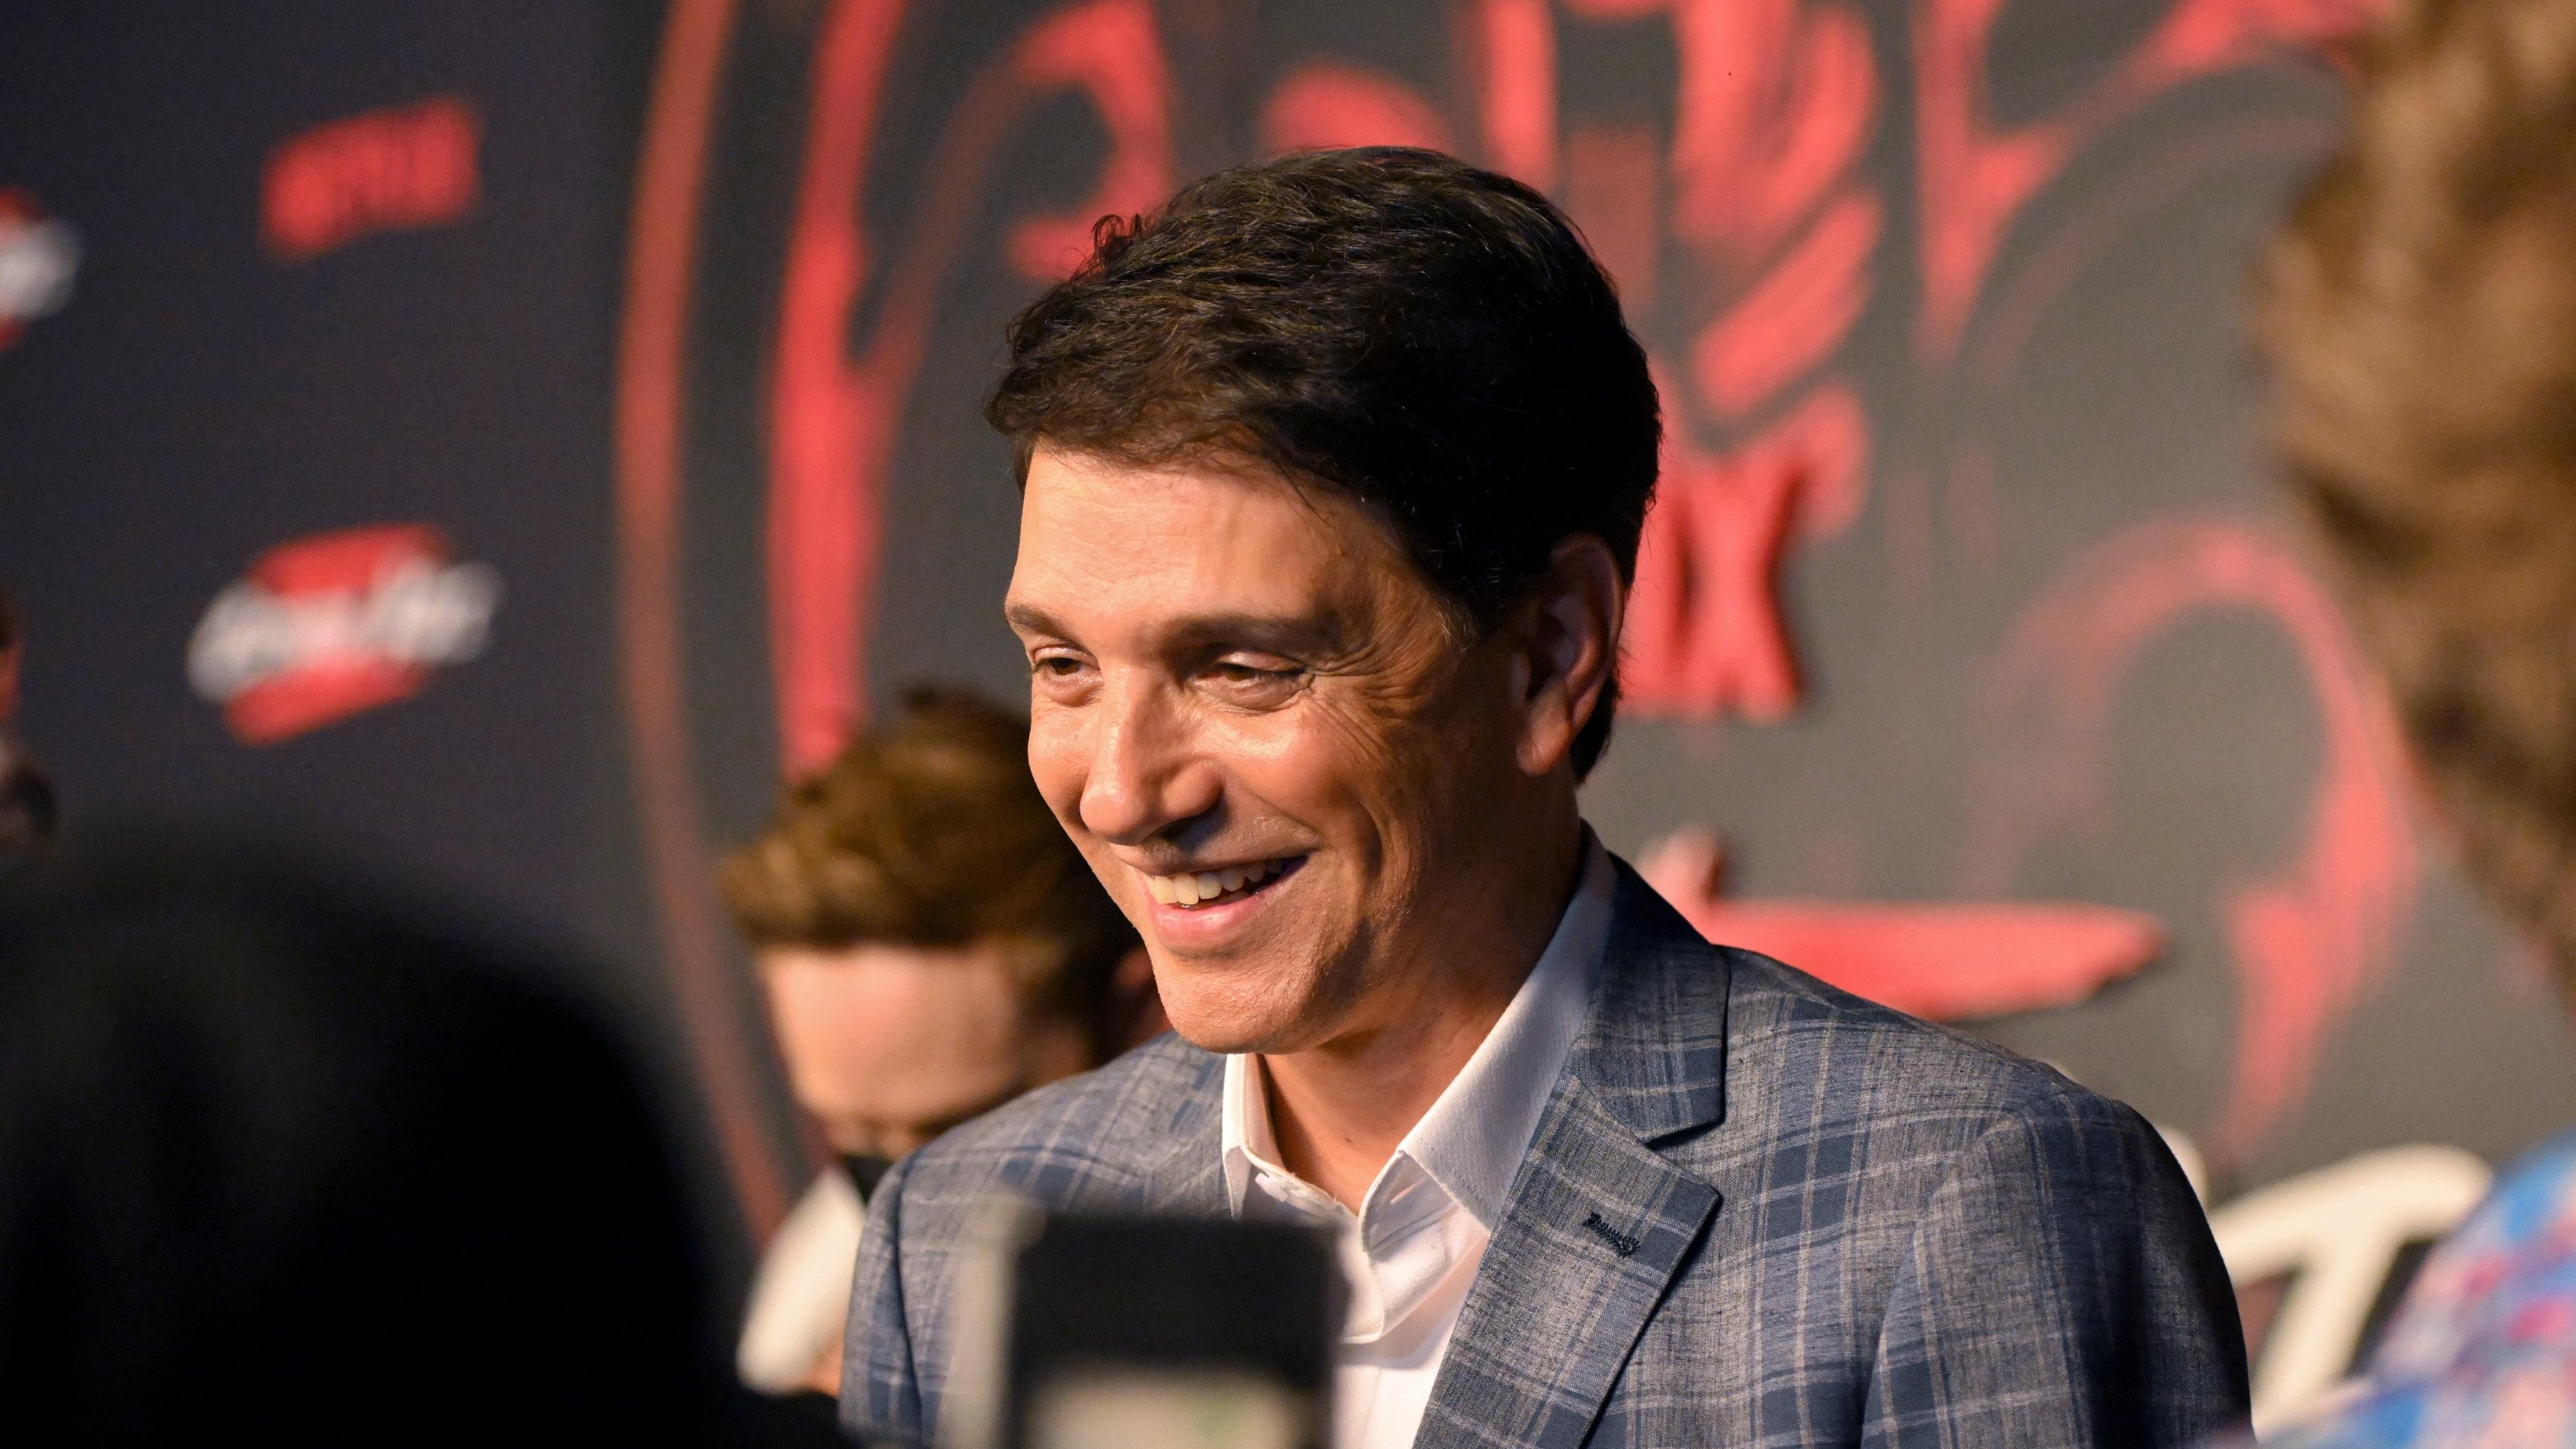 Sorry, Ralph Macchio doesn’t know anything about the new Karate Kid movie either